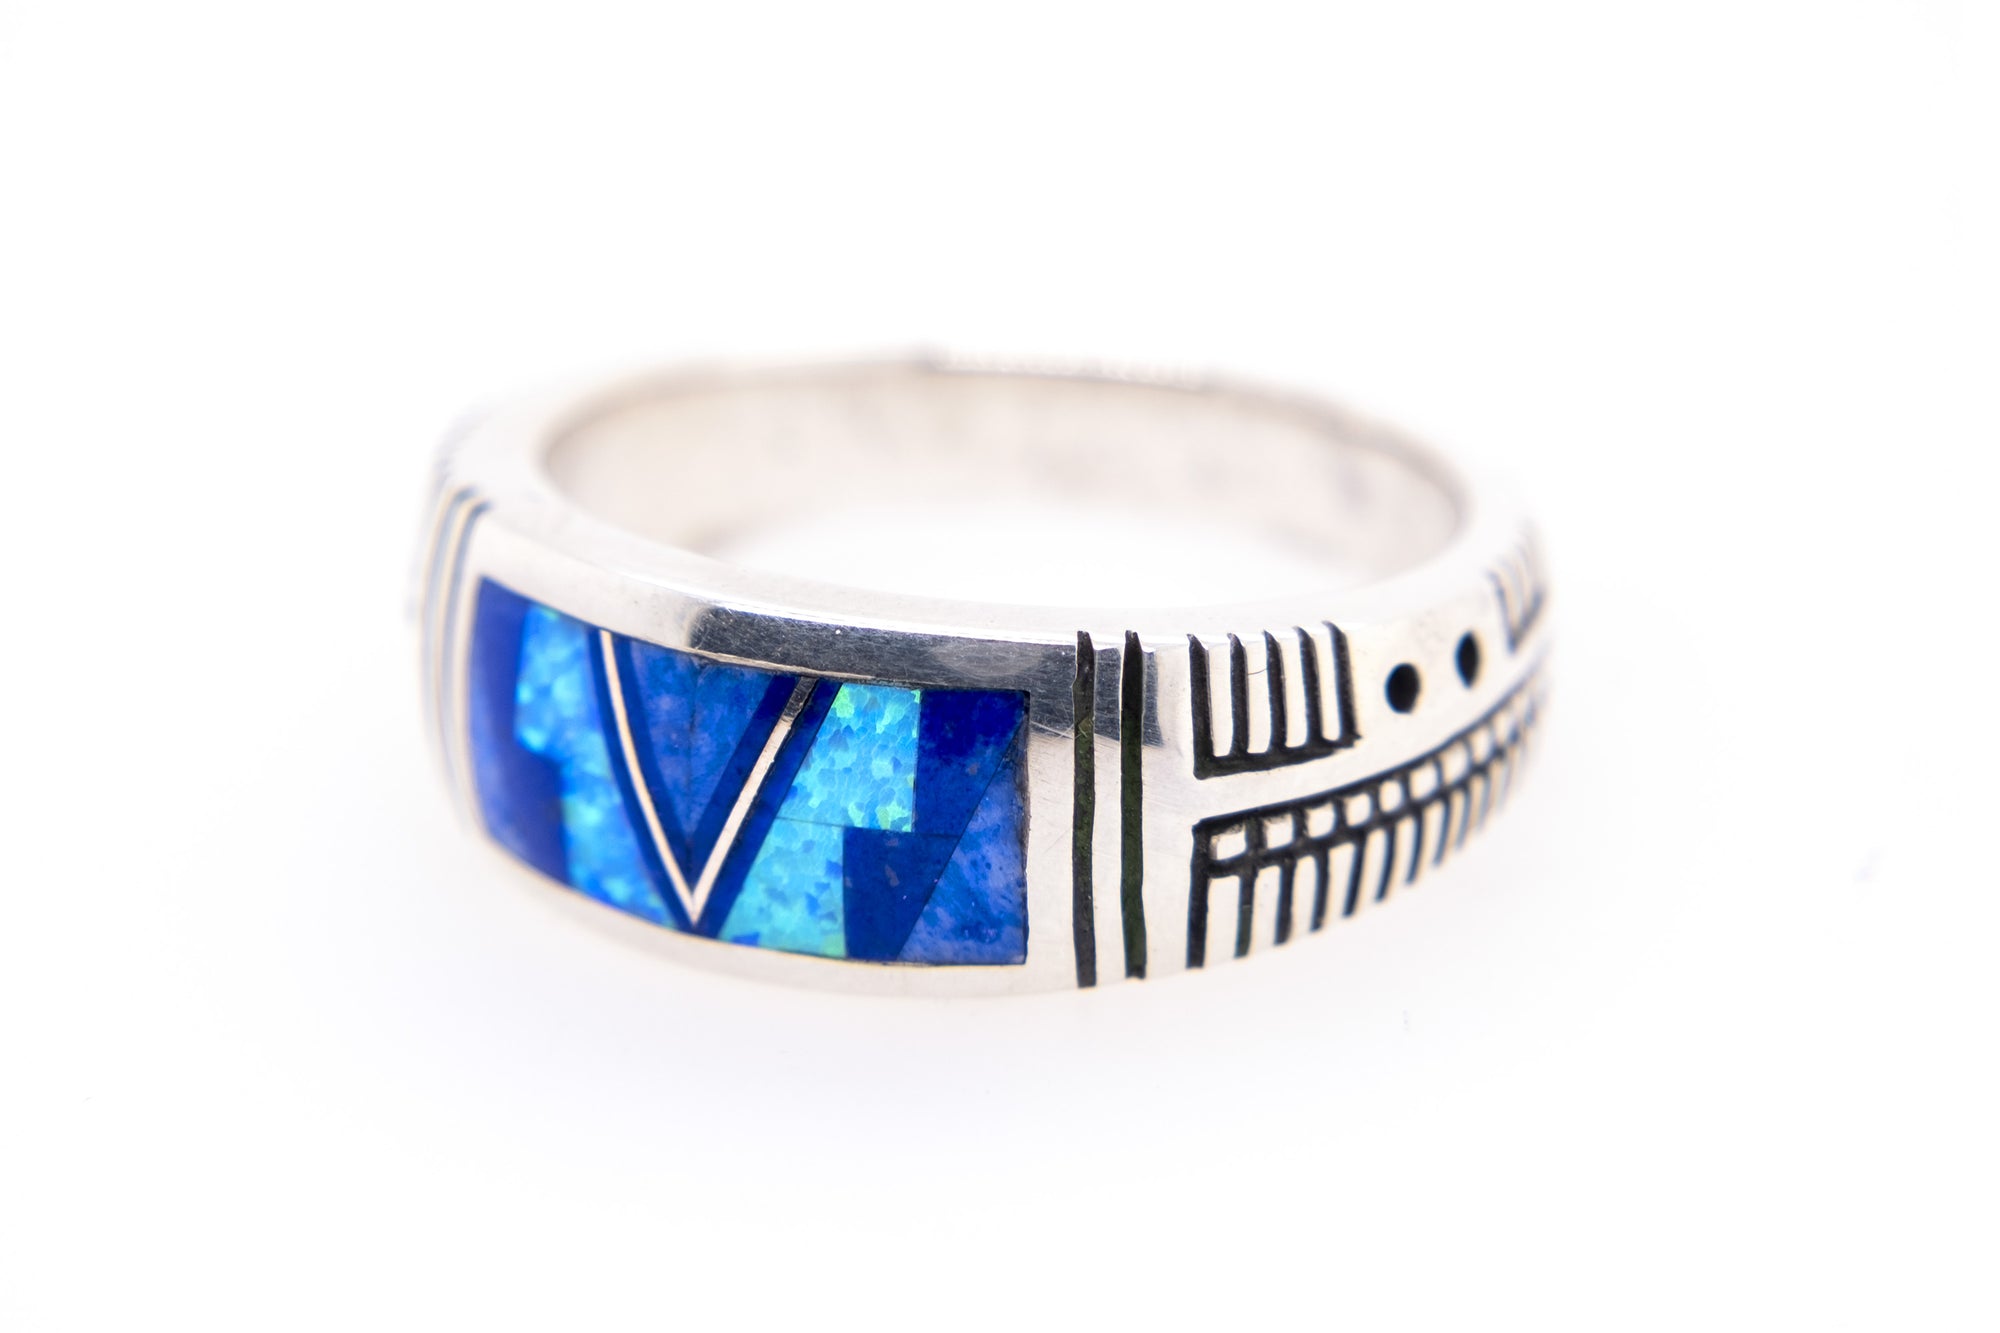 David Rosales Lined Blue Sky Band Ring - Side